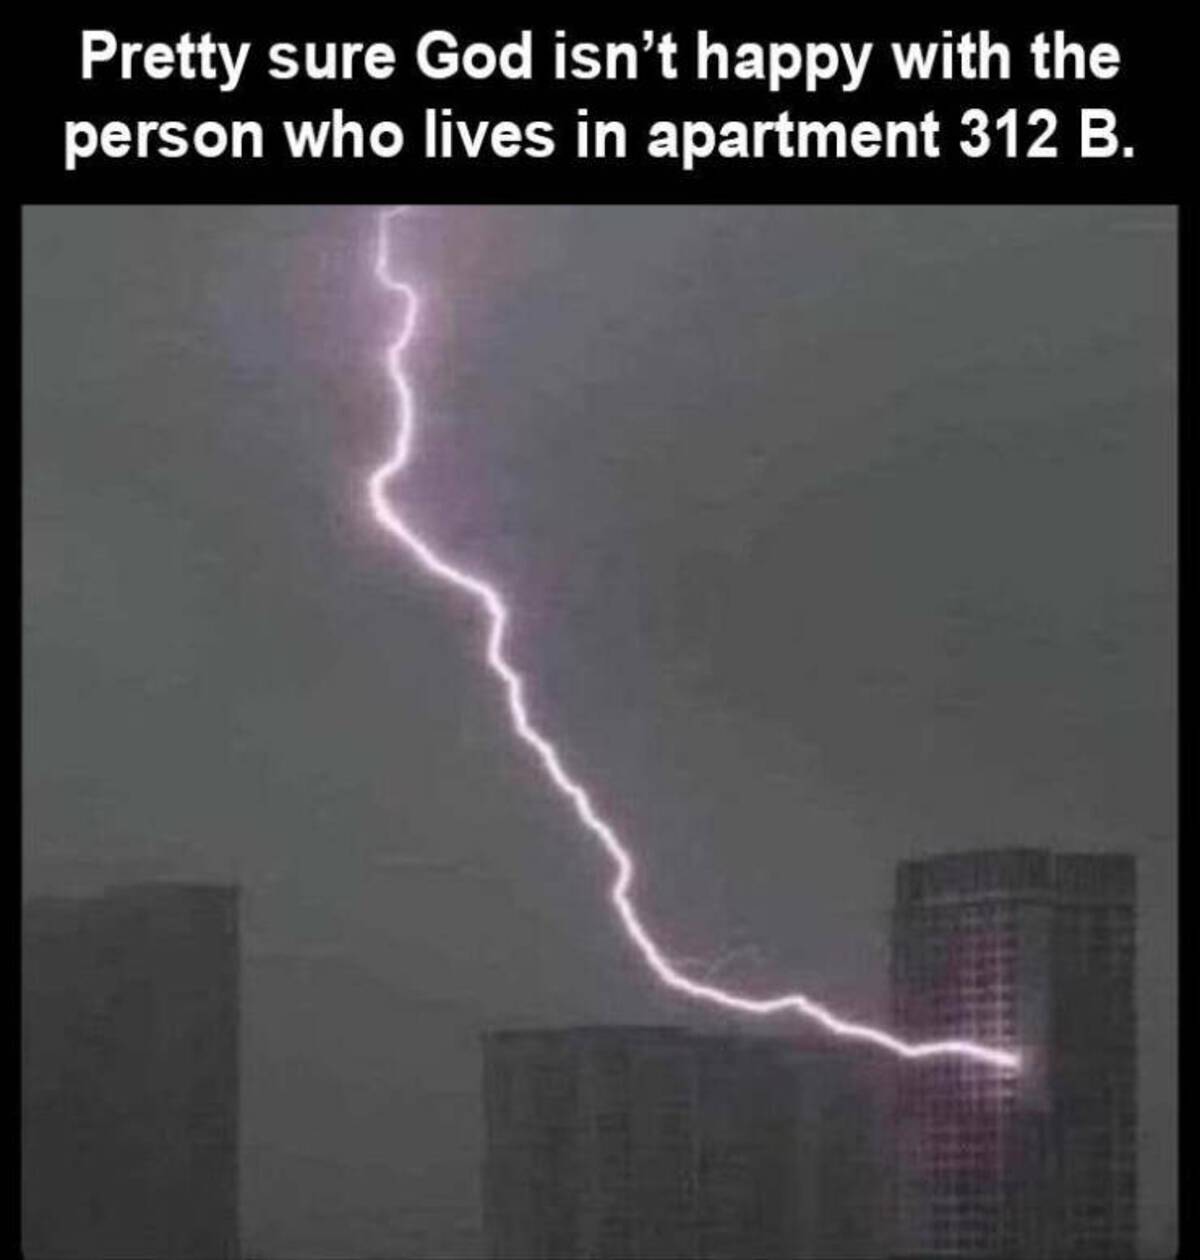 lightning - Pretty sure God isn't happy with the person who lives in apartment 312 B.